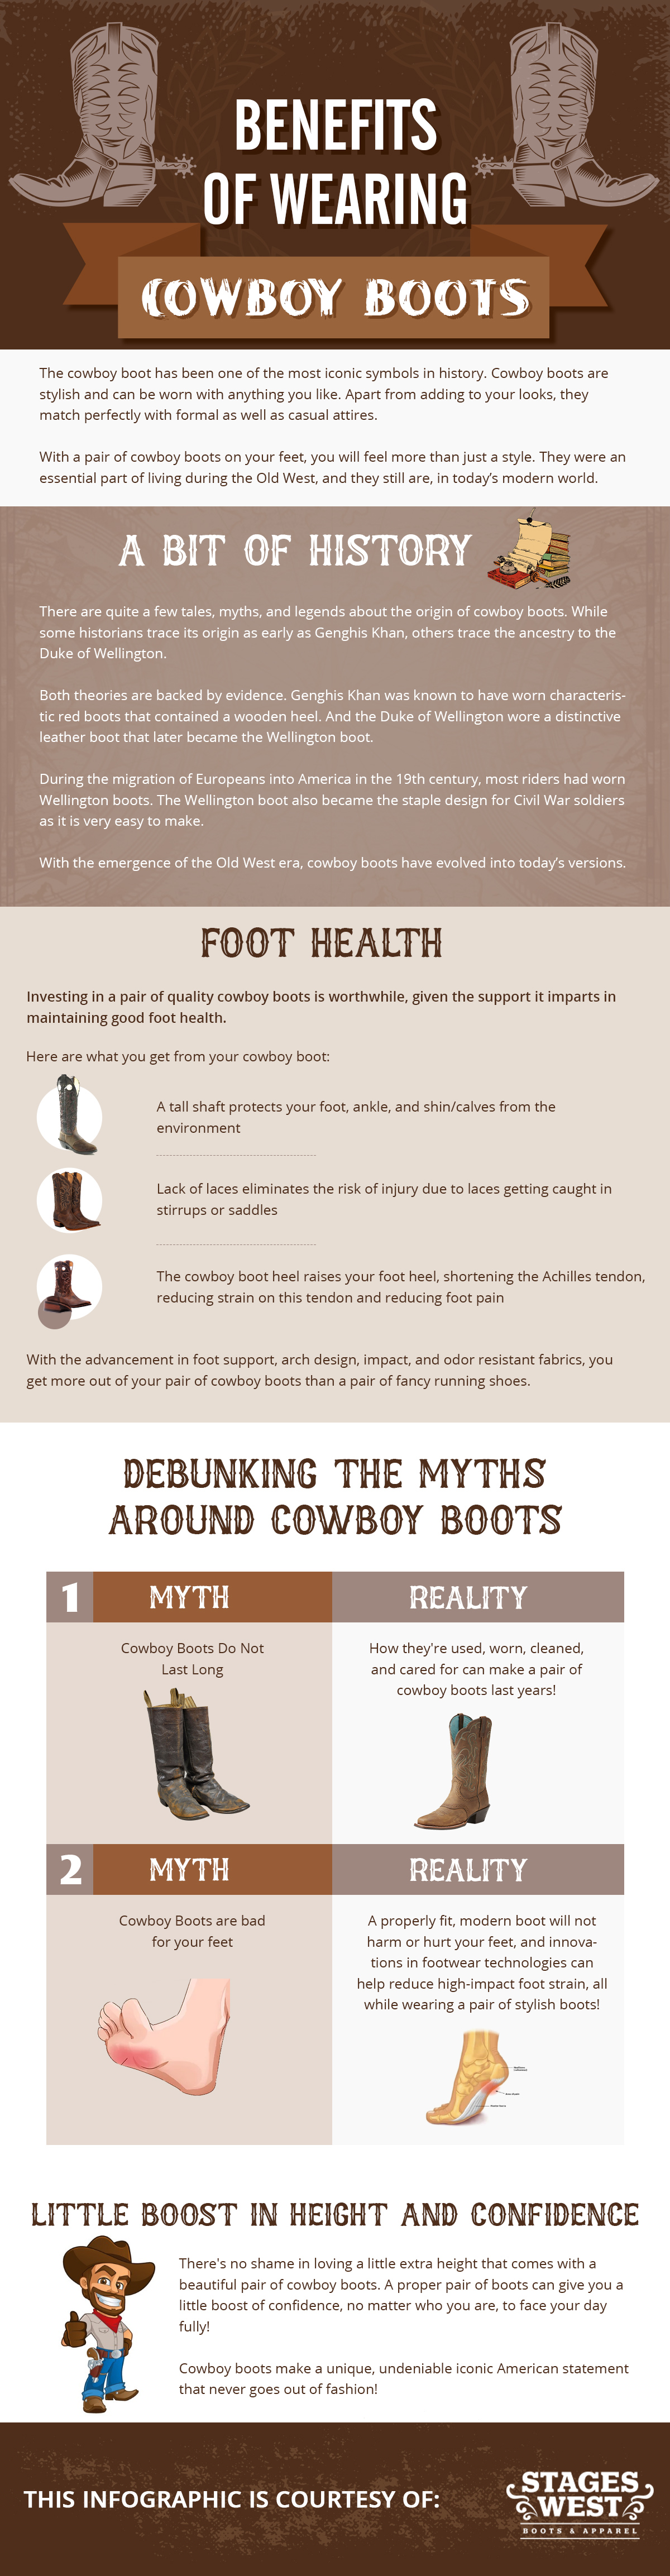 cowboy boots benefits infographic